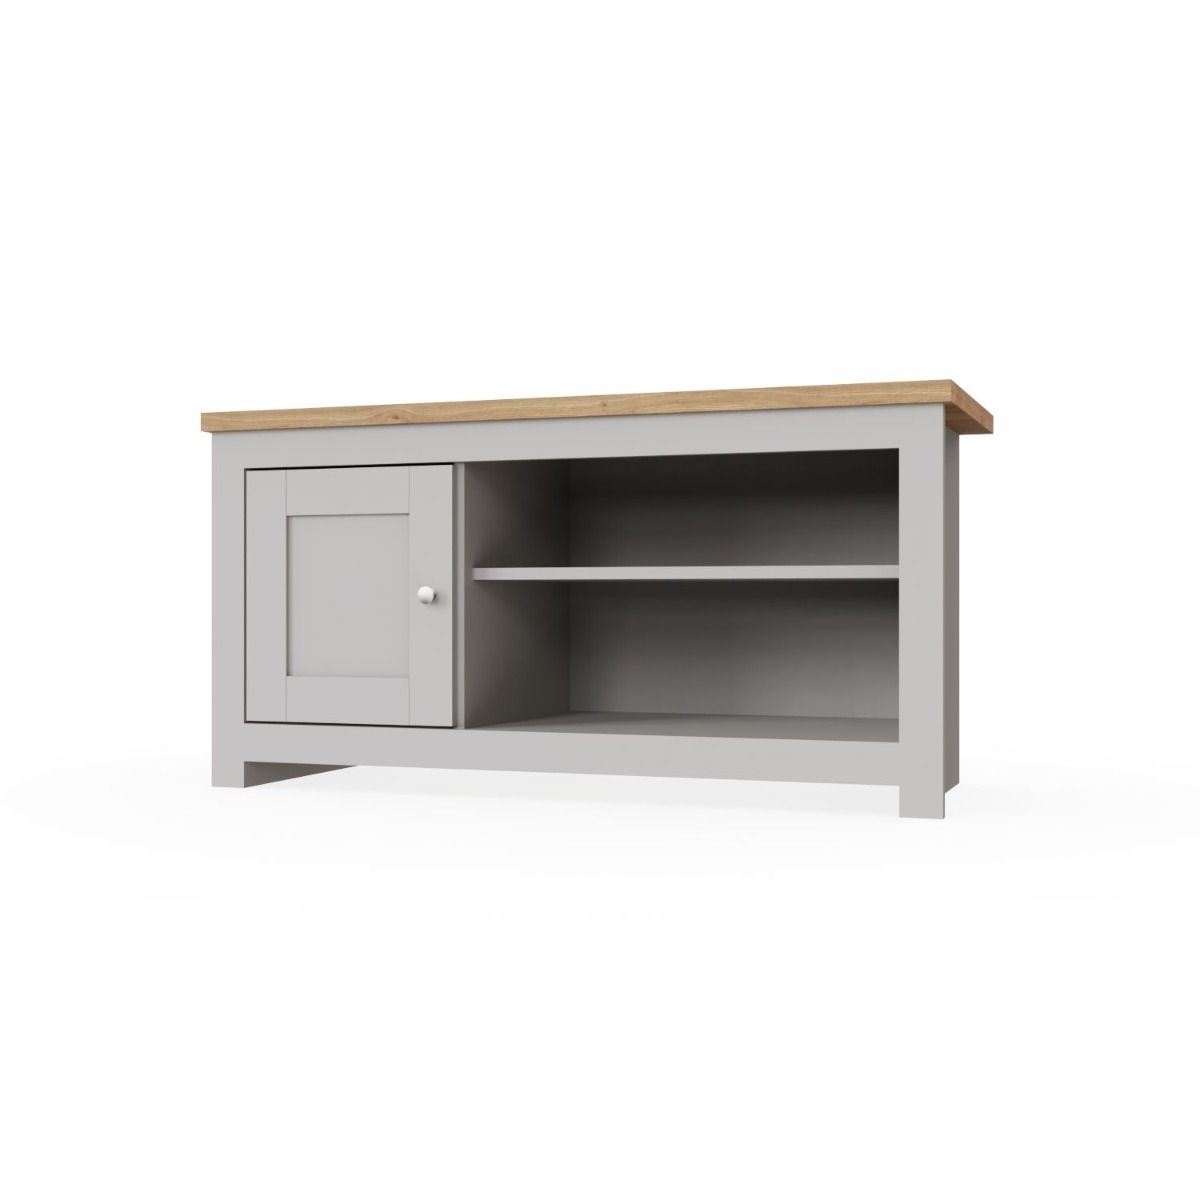 Lisbon TV Unit with 1 Door 2 Shelves allhomely